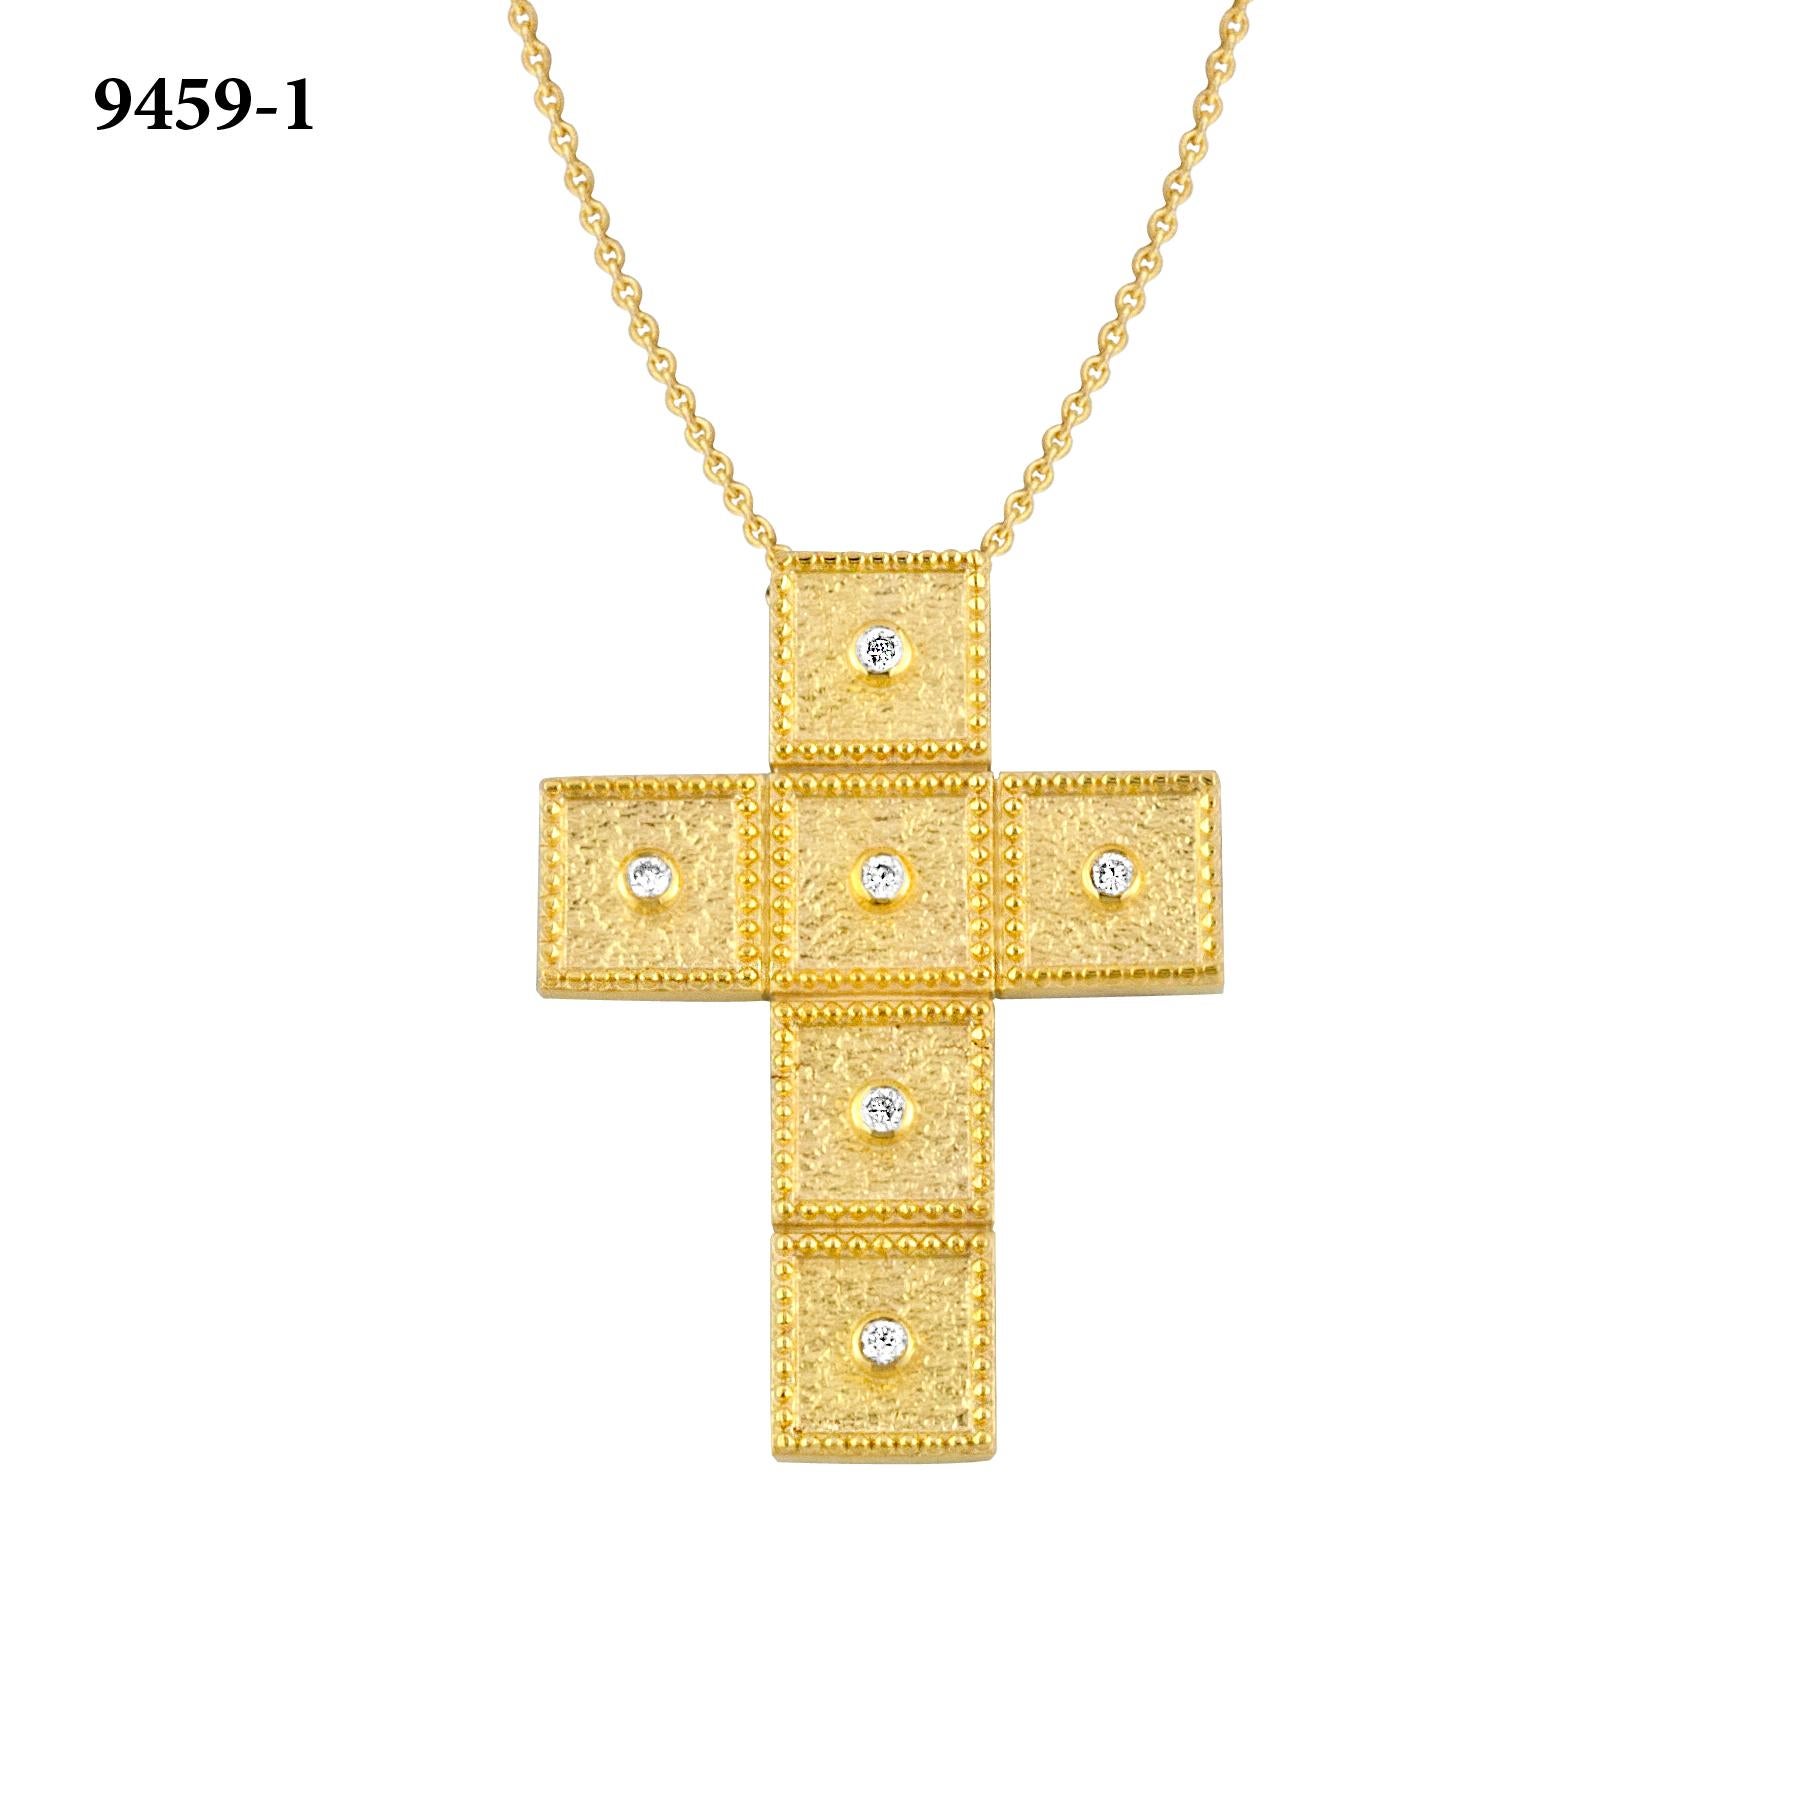 This S.Georgios Cross is all handmade from solid 18 Karat Yellow Gold and is microscopically decorated with granulation work all the way around. The background of this gorgeous Cross has a unique velvet look and features 6 Brilliant cut Diamonds